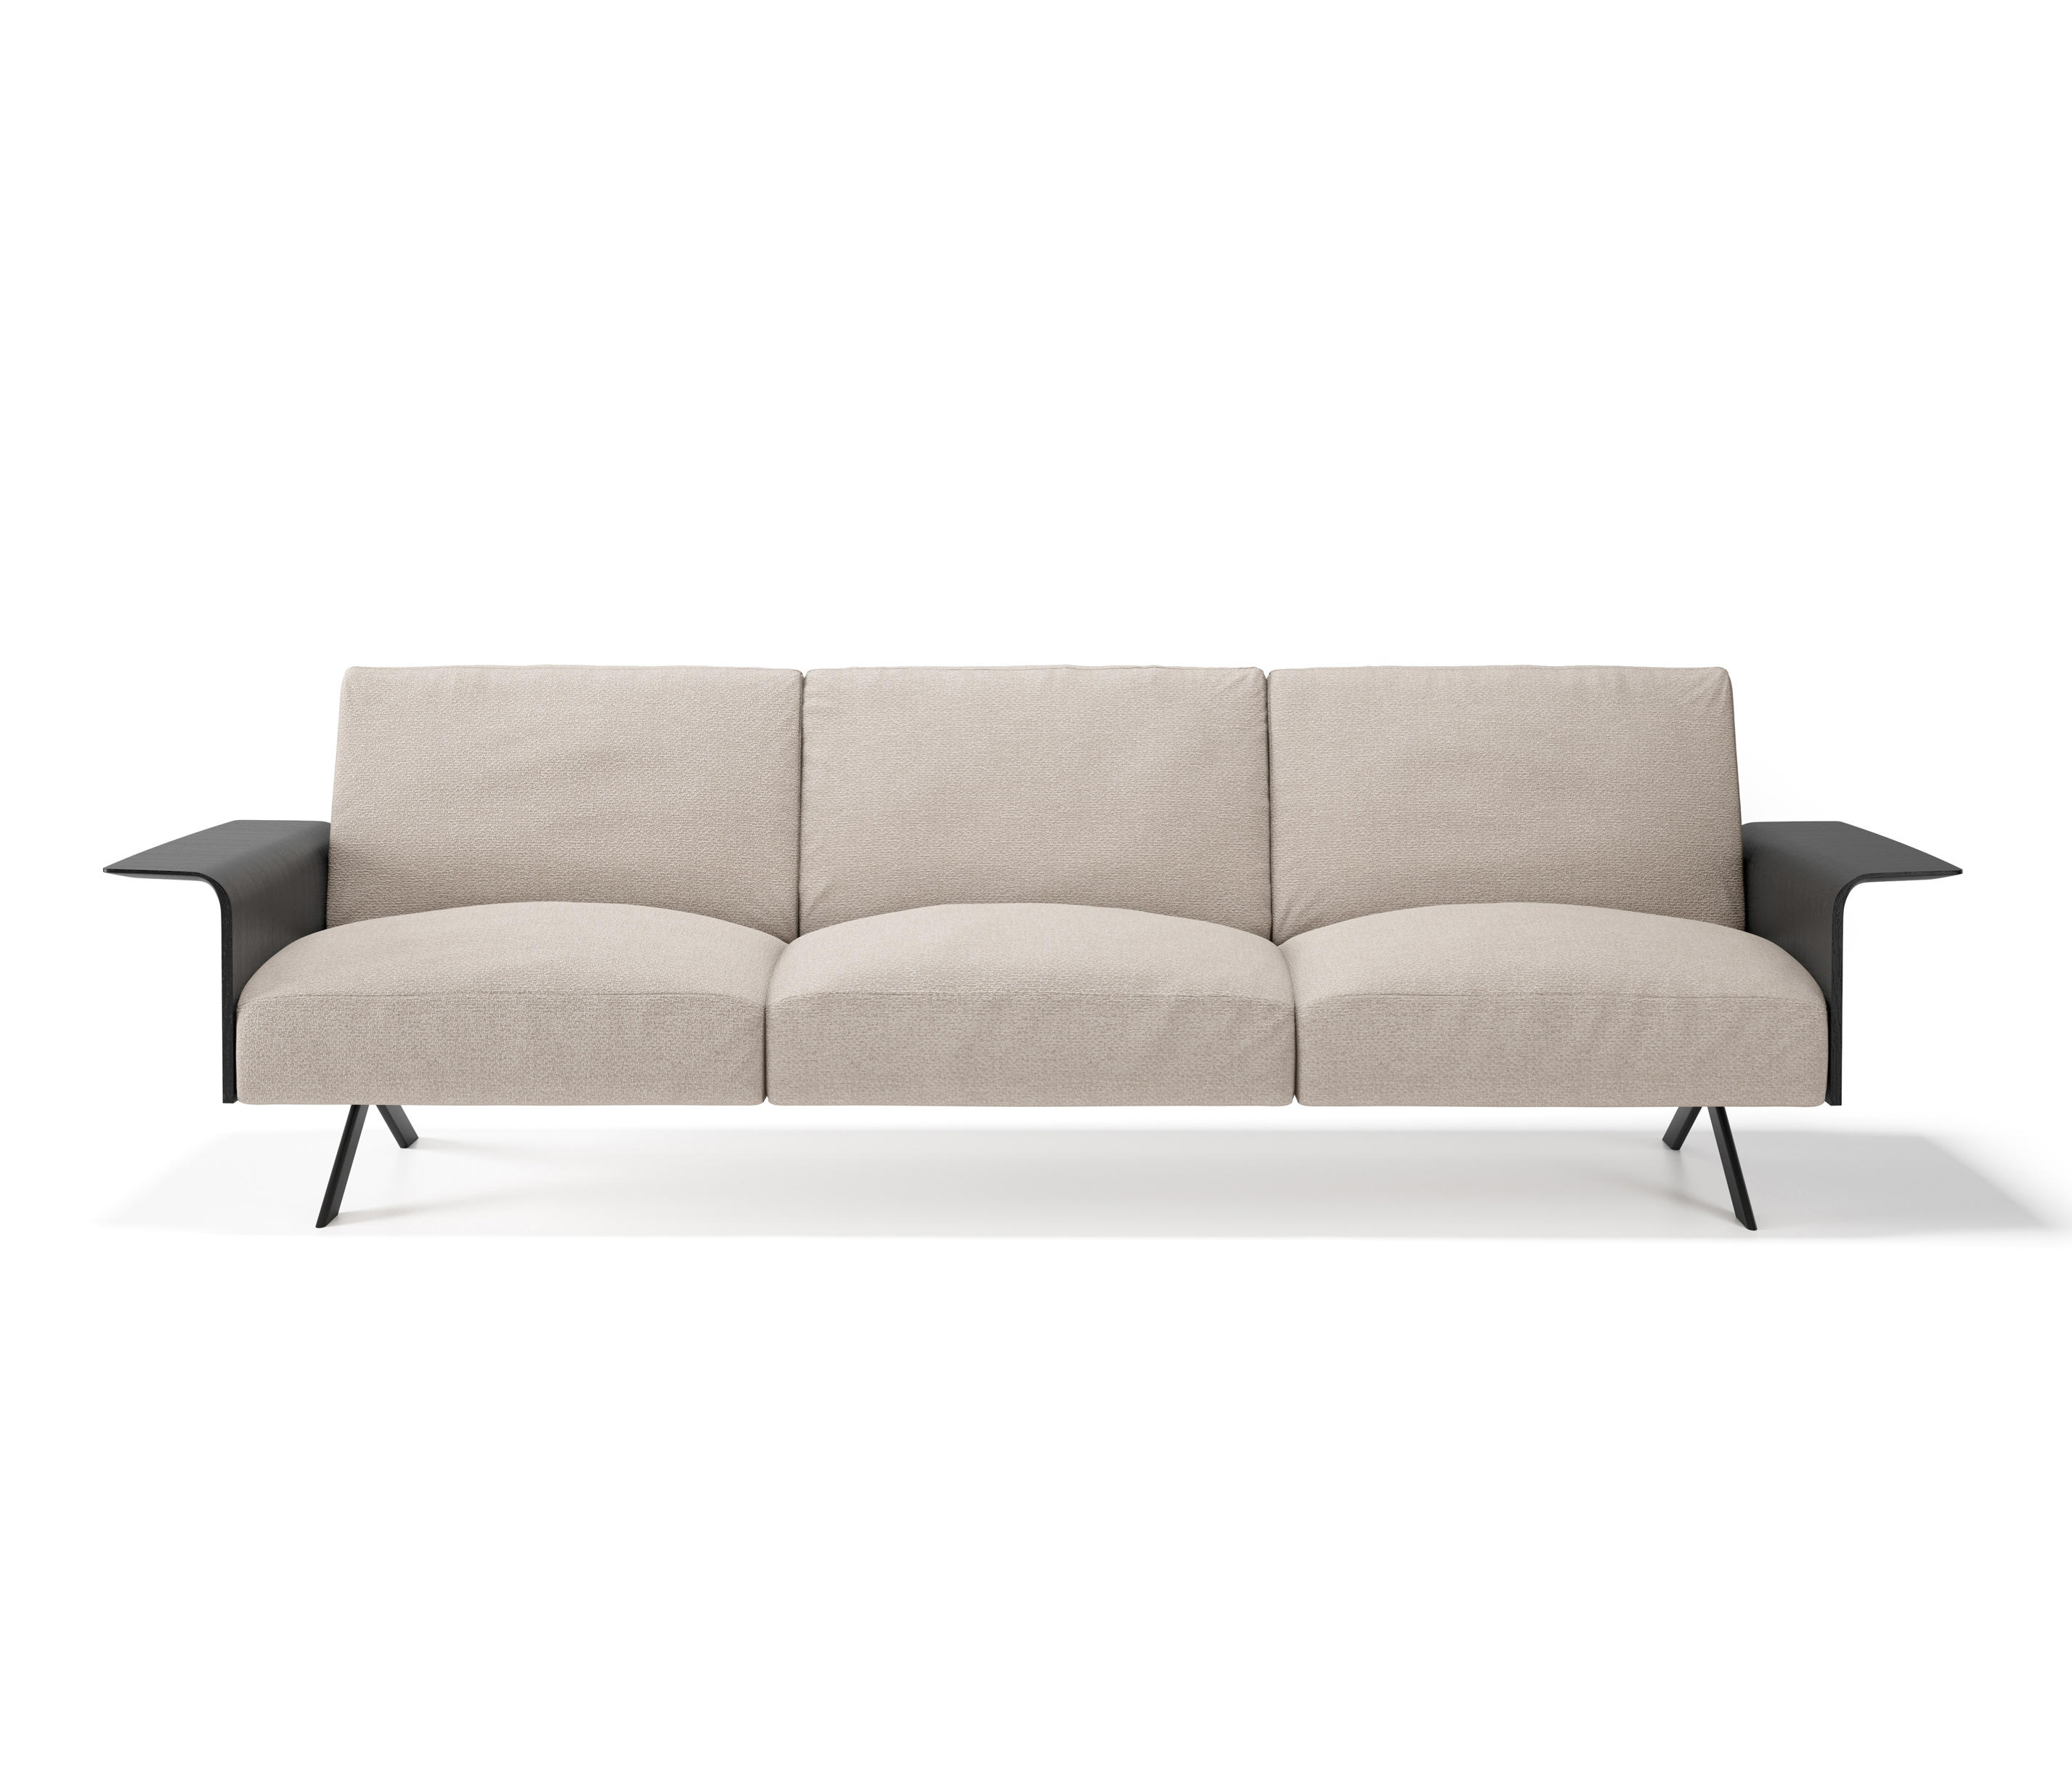 SISTEMA SOFT - Sofas from viccarbe | Architonic